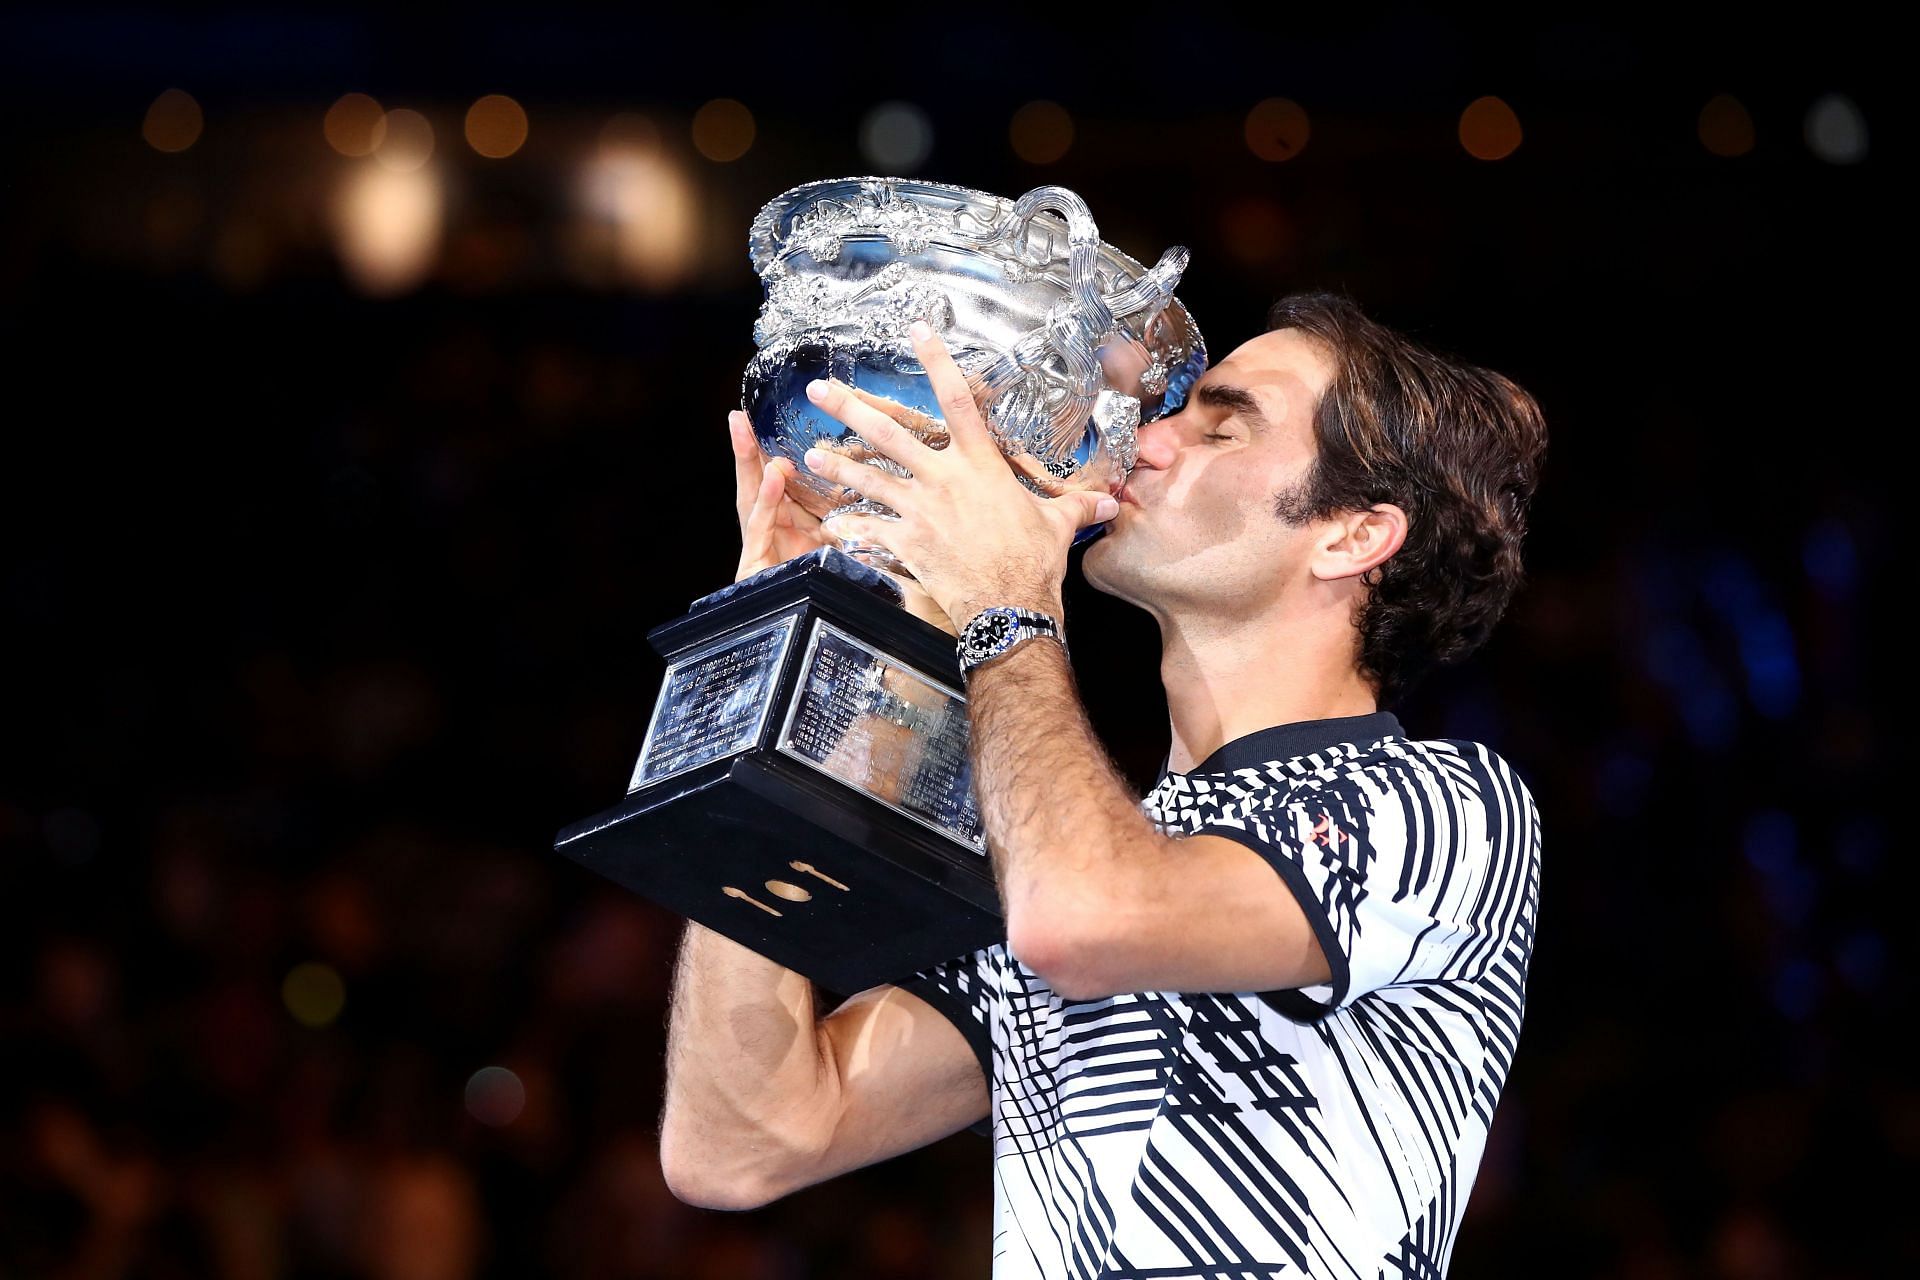 Roger defeated four Top-10 players to win the 2017 Australian Open